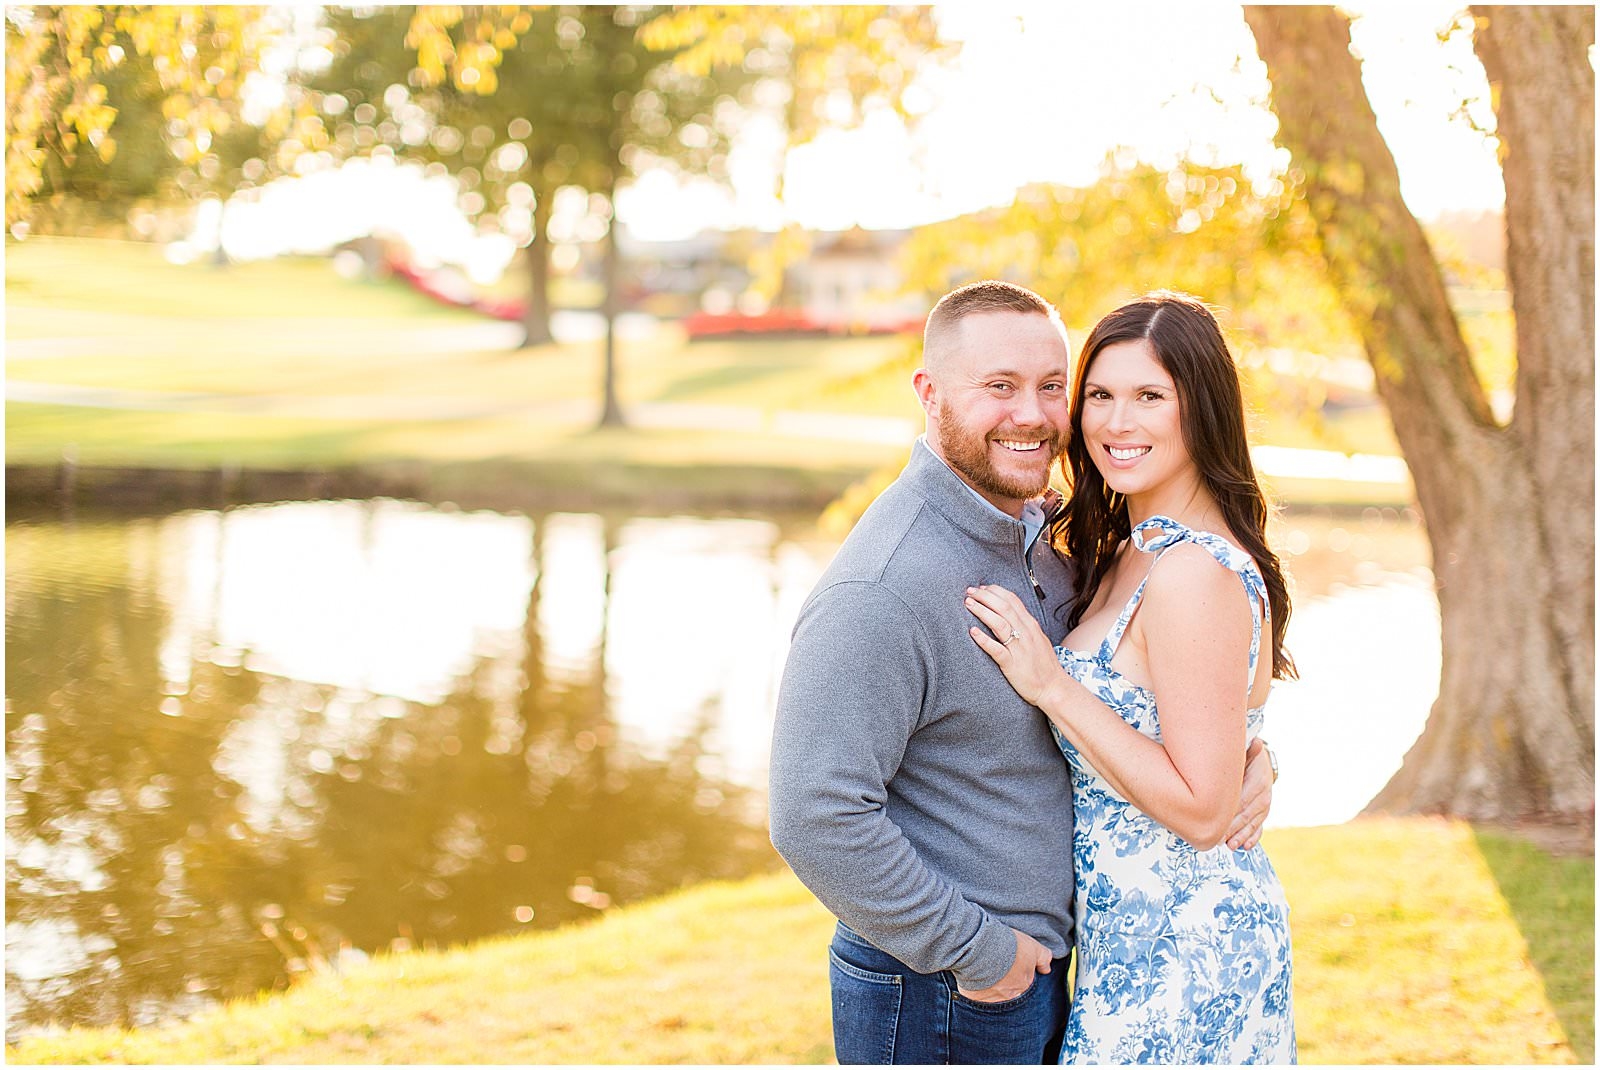 A Rolling Hills Country Club Engagement Session | Meagan and Kyle | Bret and Brandie Photography 0035.jpg